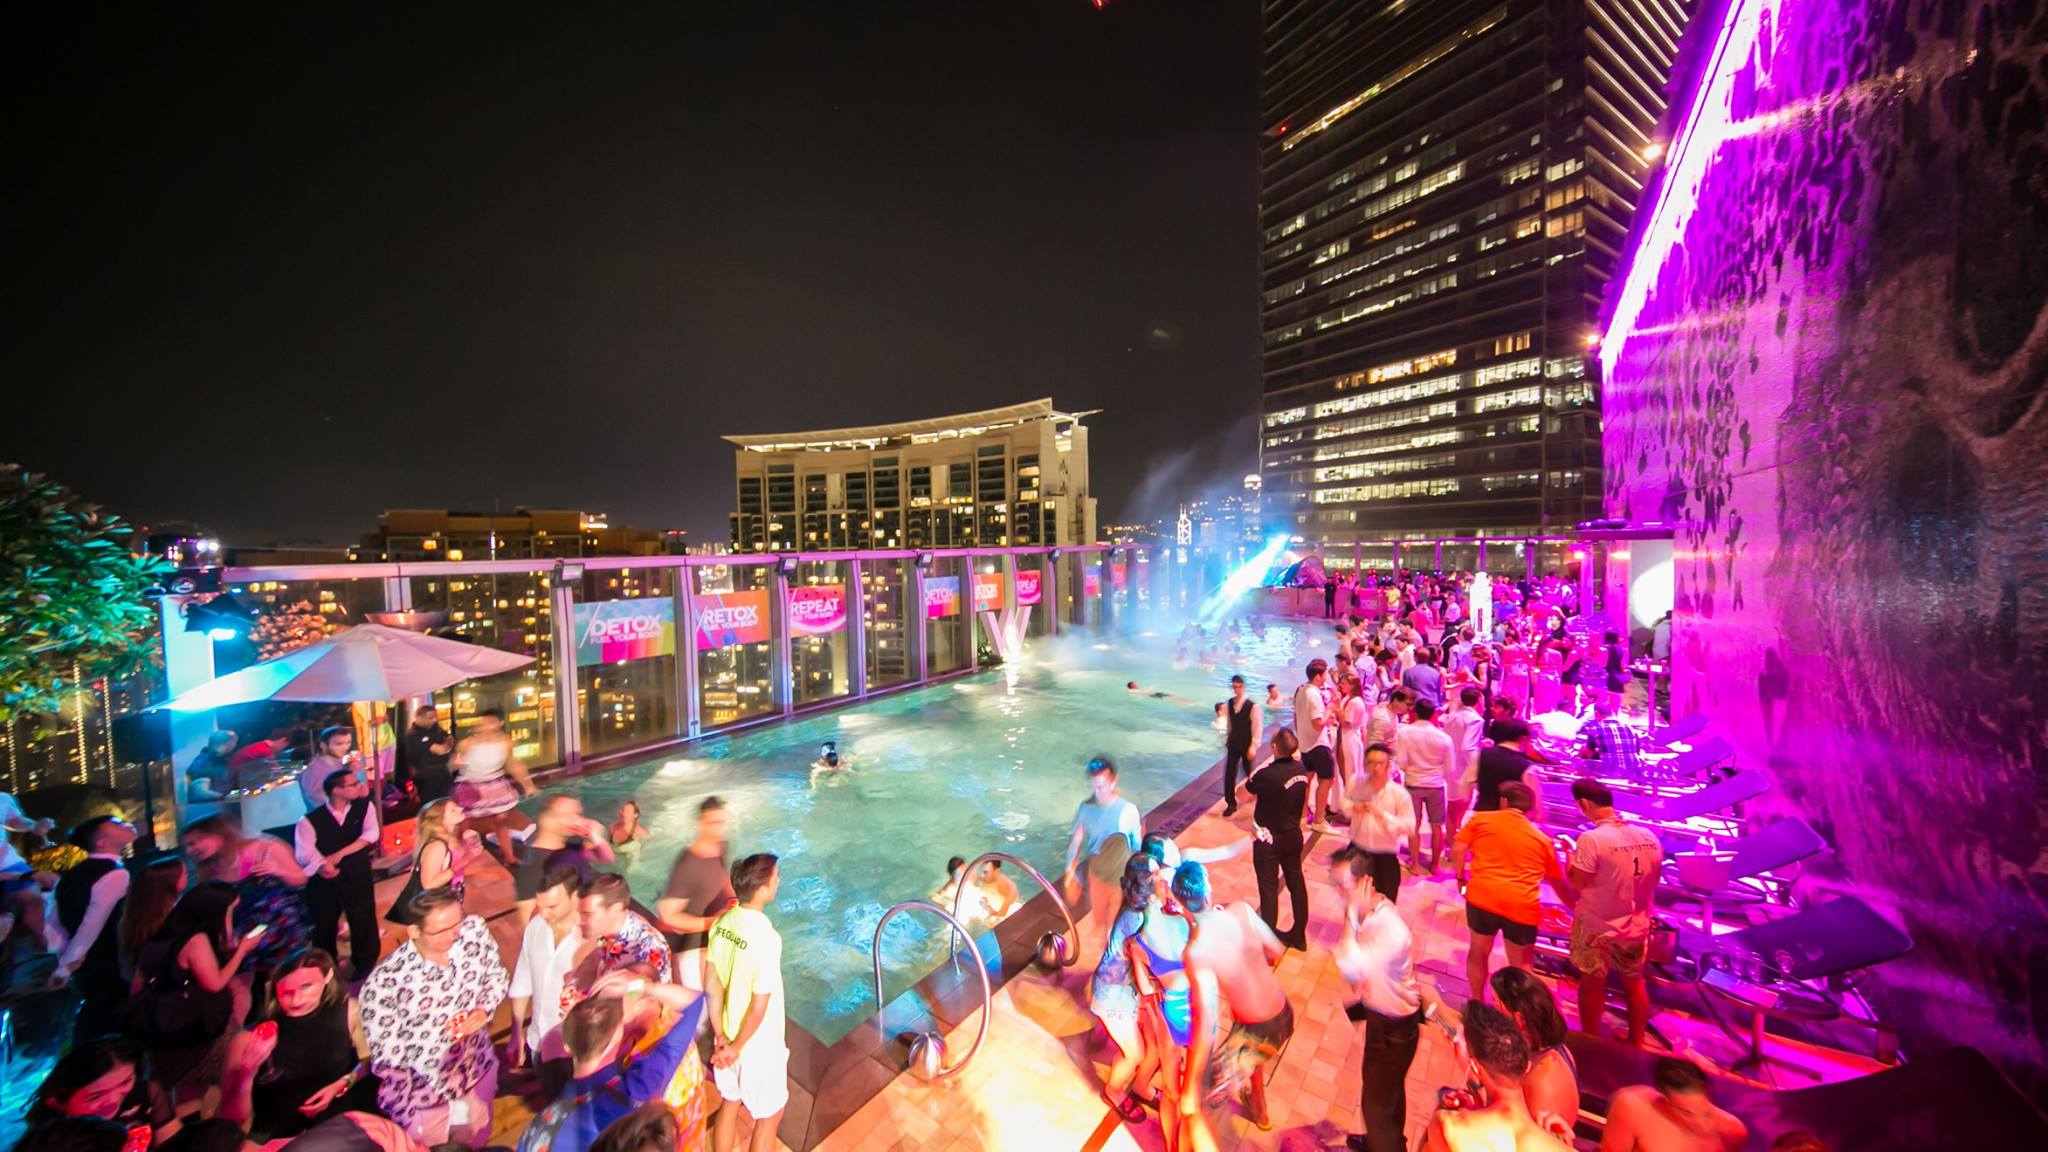 Giveaway: Win a table at W Hong Kong’s Heat Wave pool party and after party